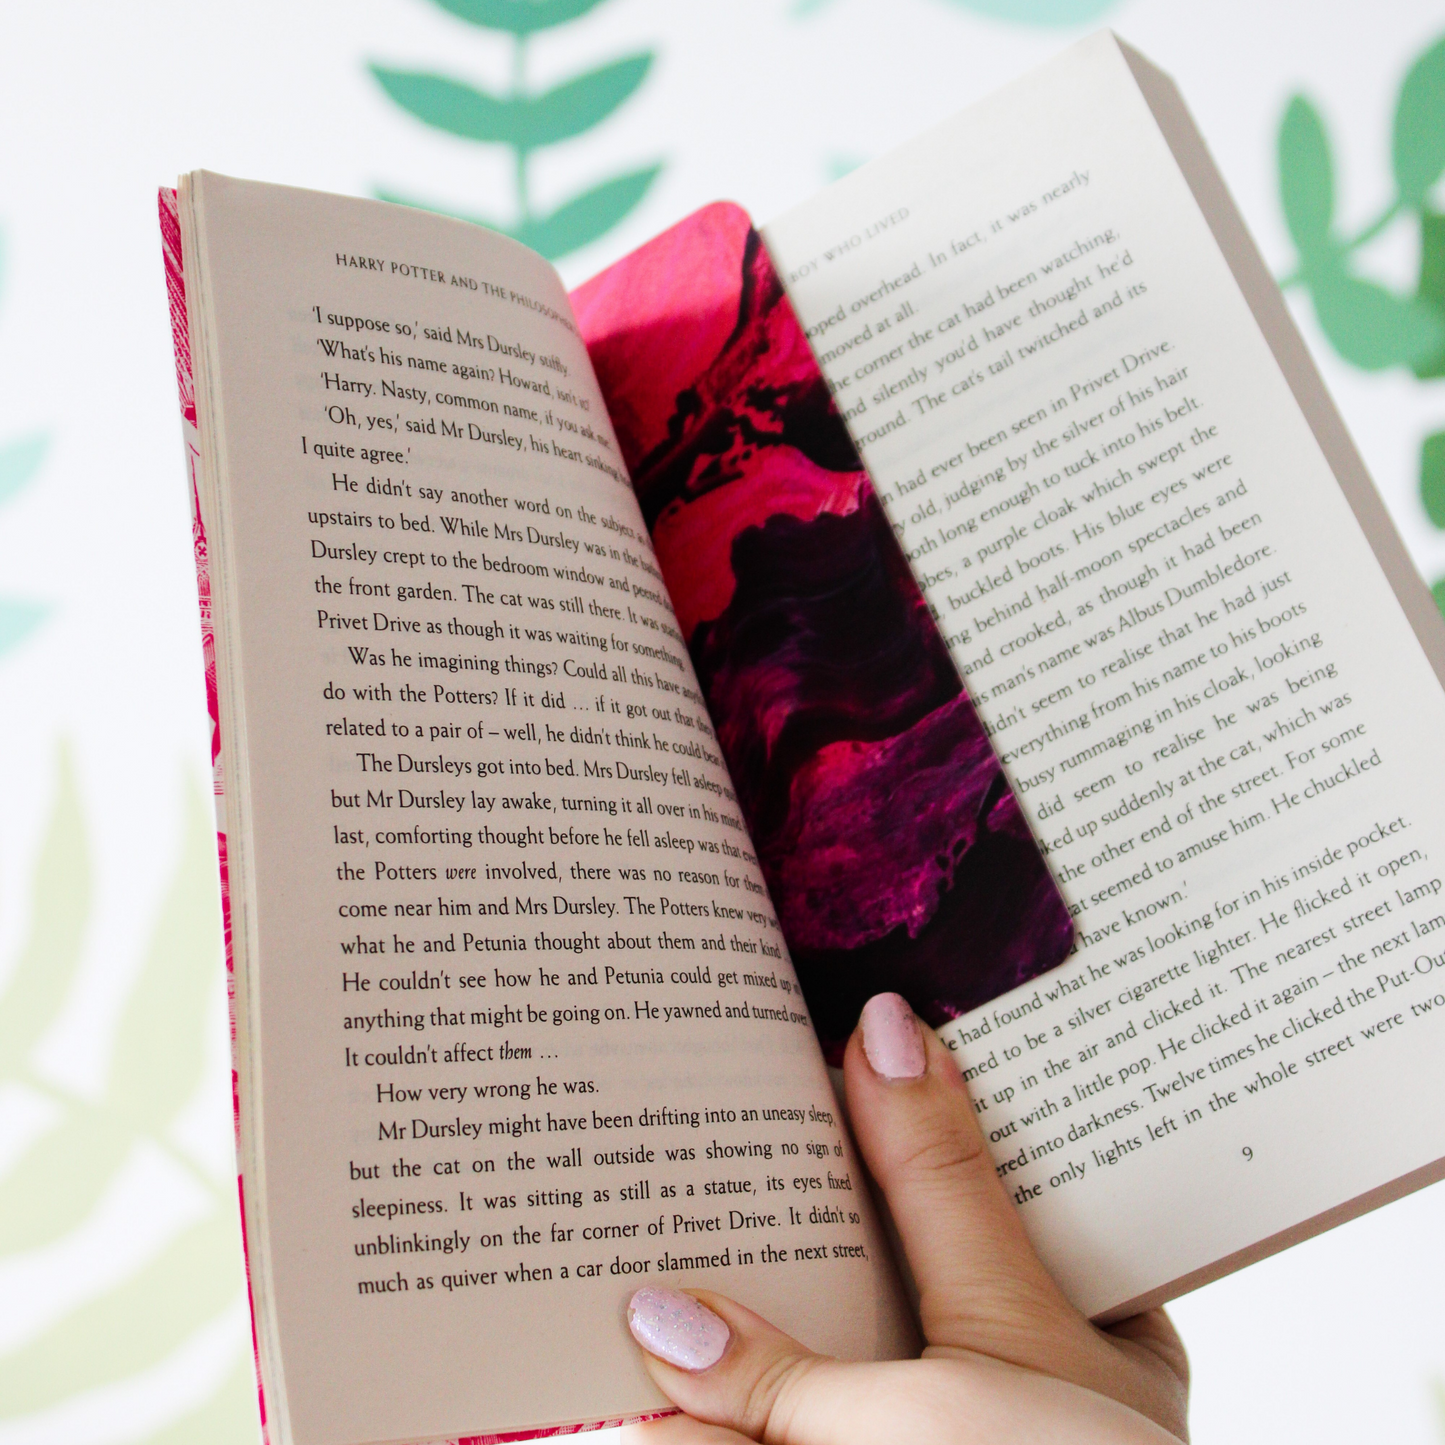 The pink and purple sky bookmark is inside a book being held.